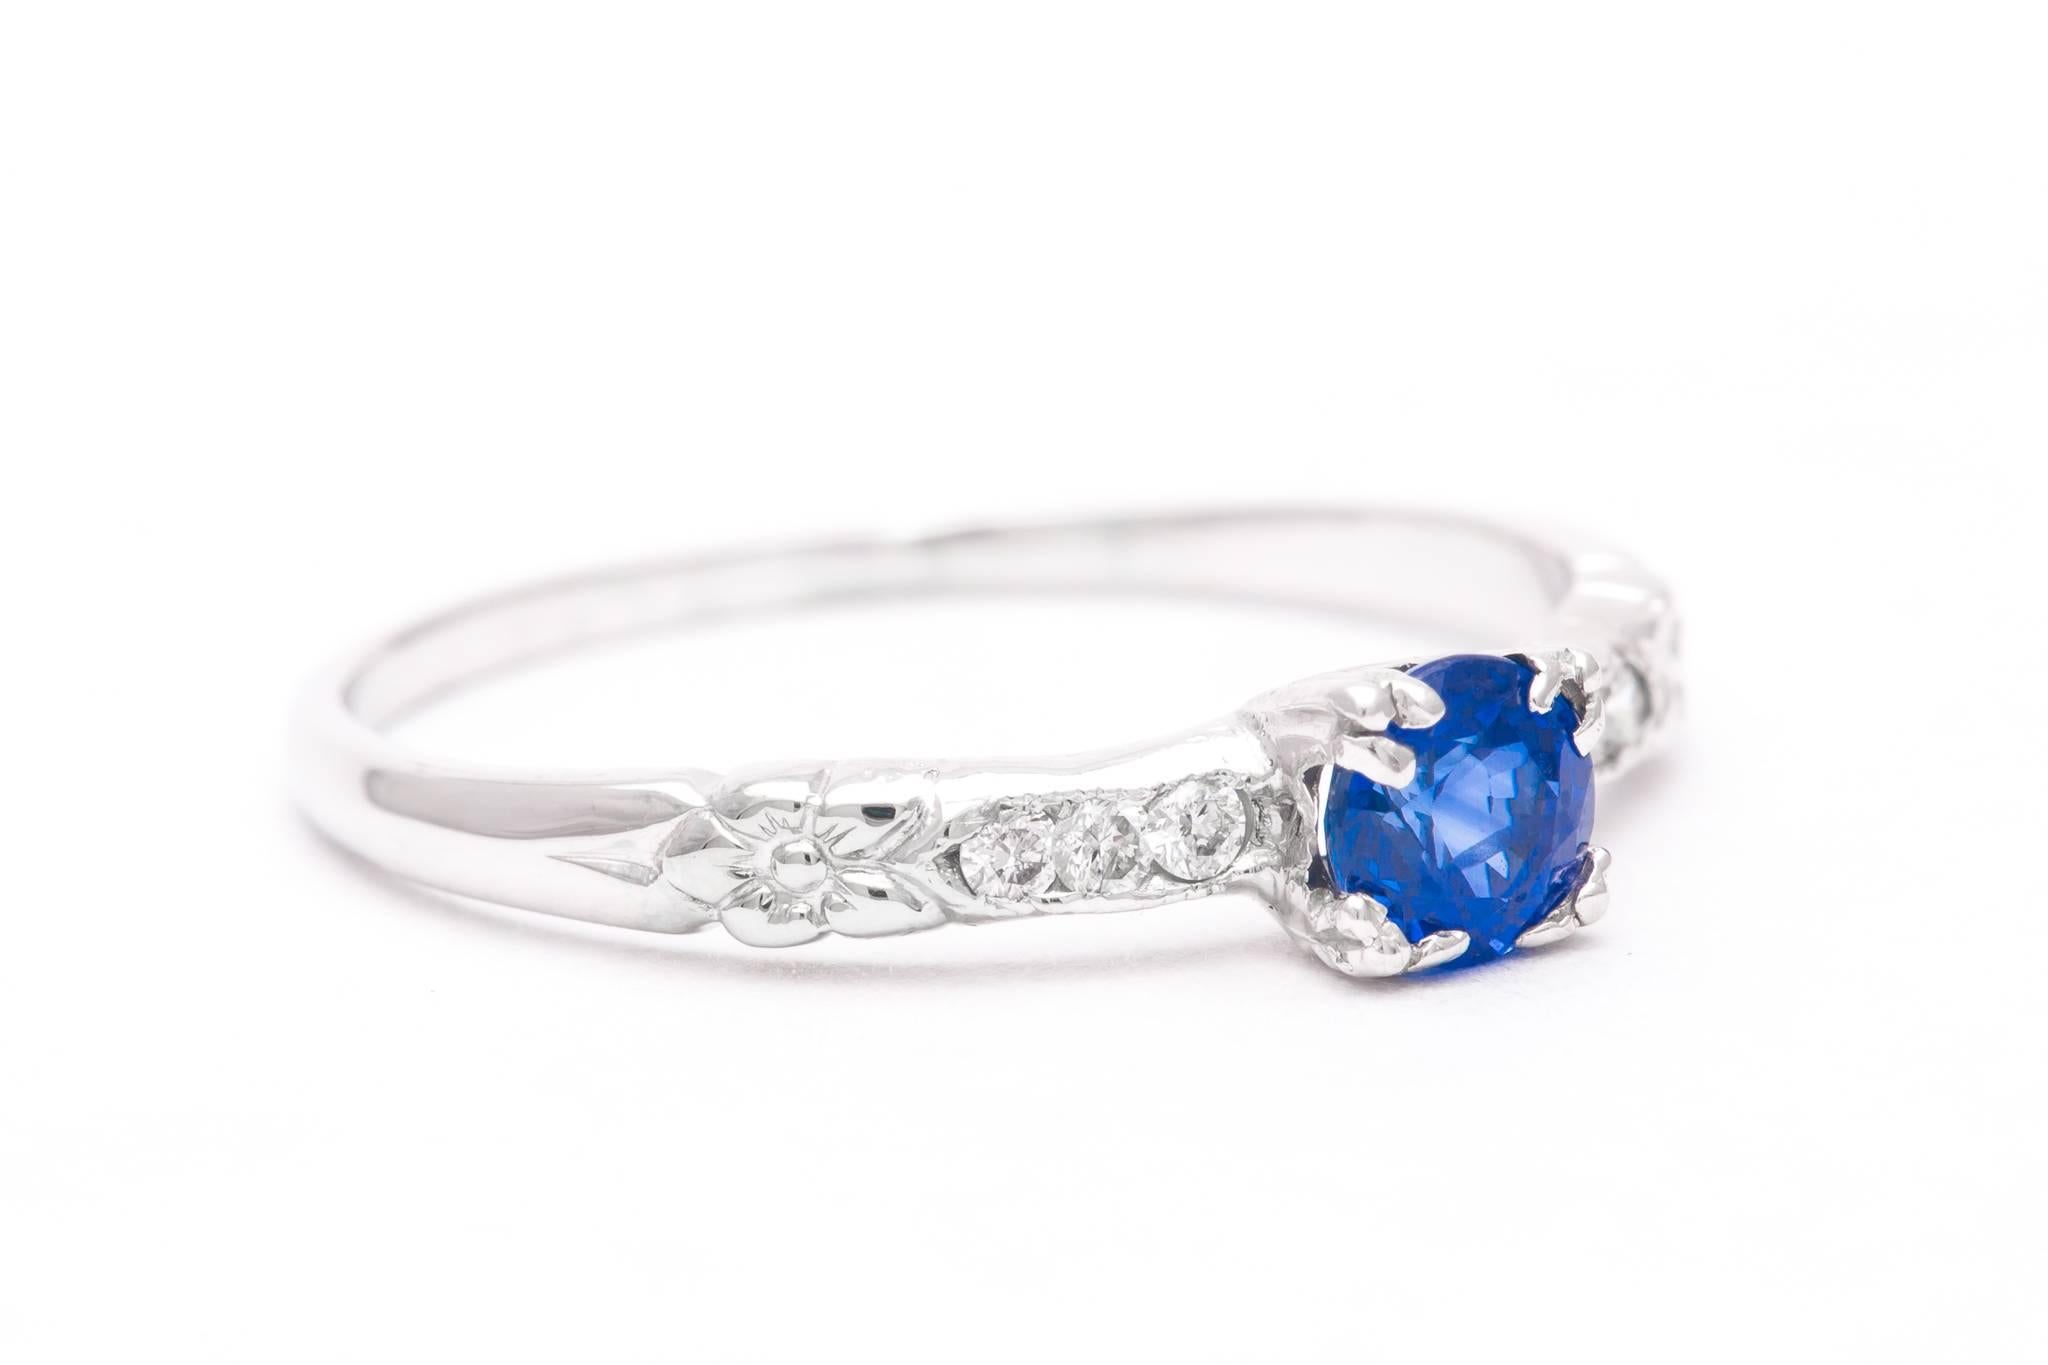 An original art deco period orange blossom pattern sapphire and diamond ring in luxurious platinum.  Centered by a rich vivid blue sapphire this ring features accenting diamonds and hand carved orange blossom flowers.

Once the most popular design